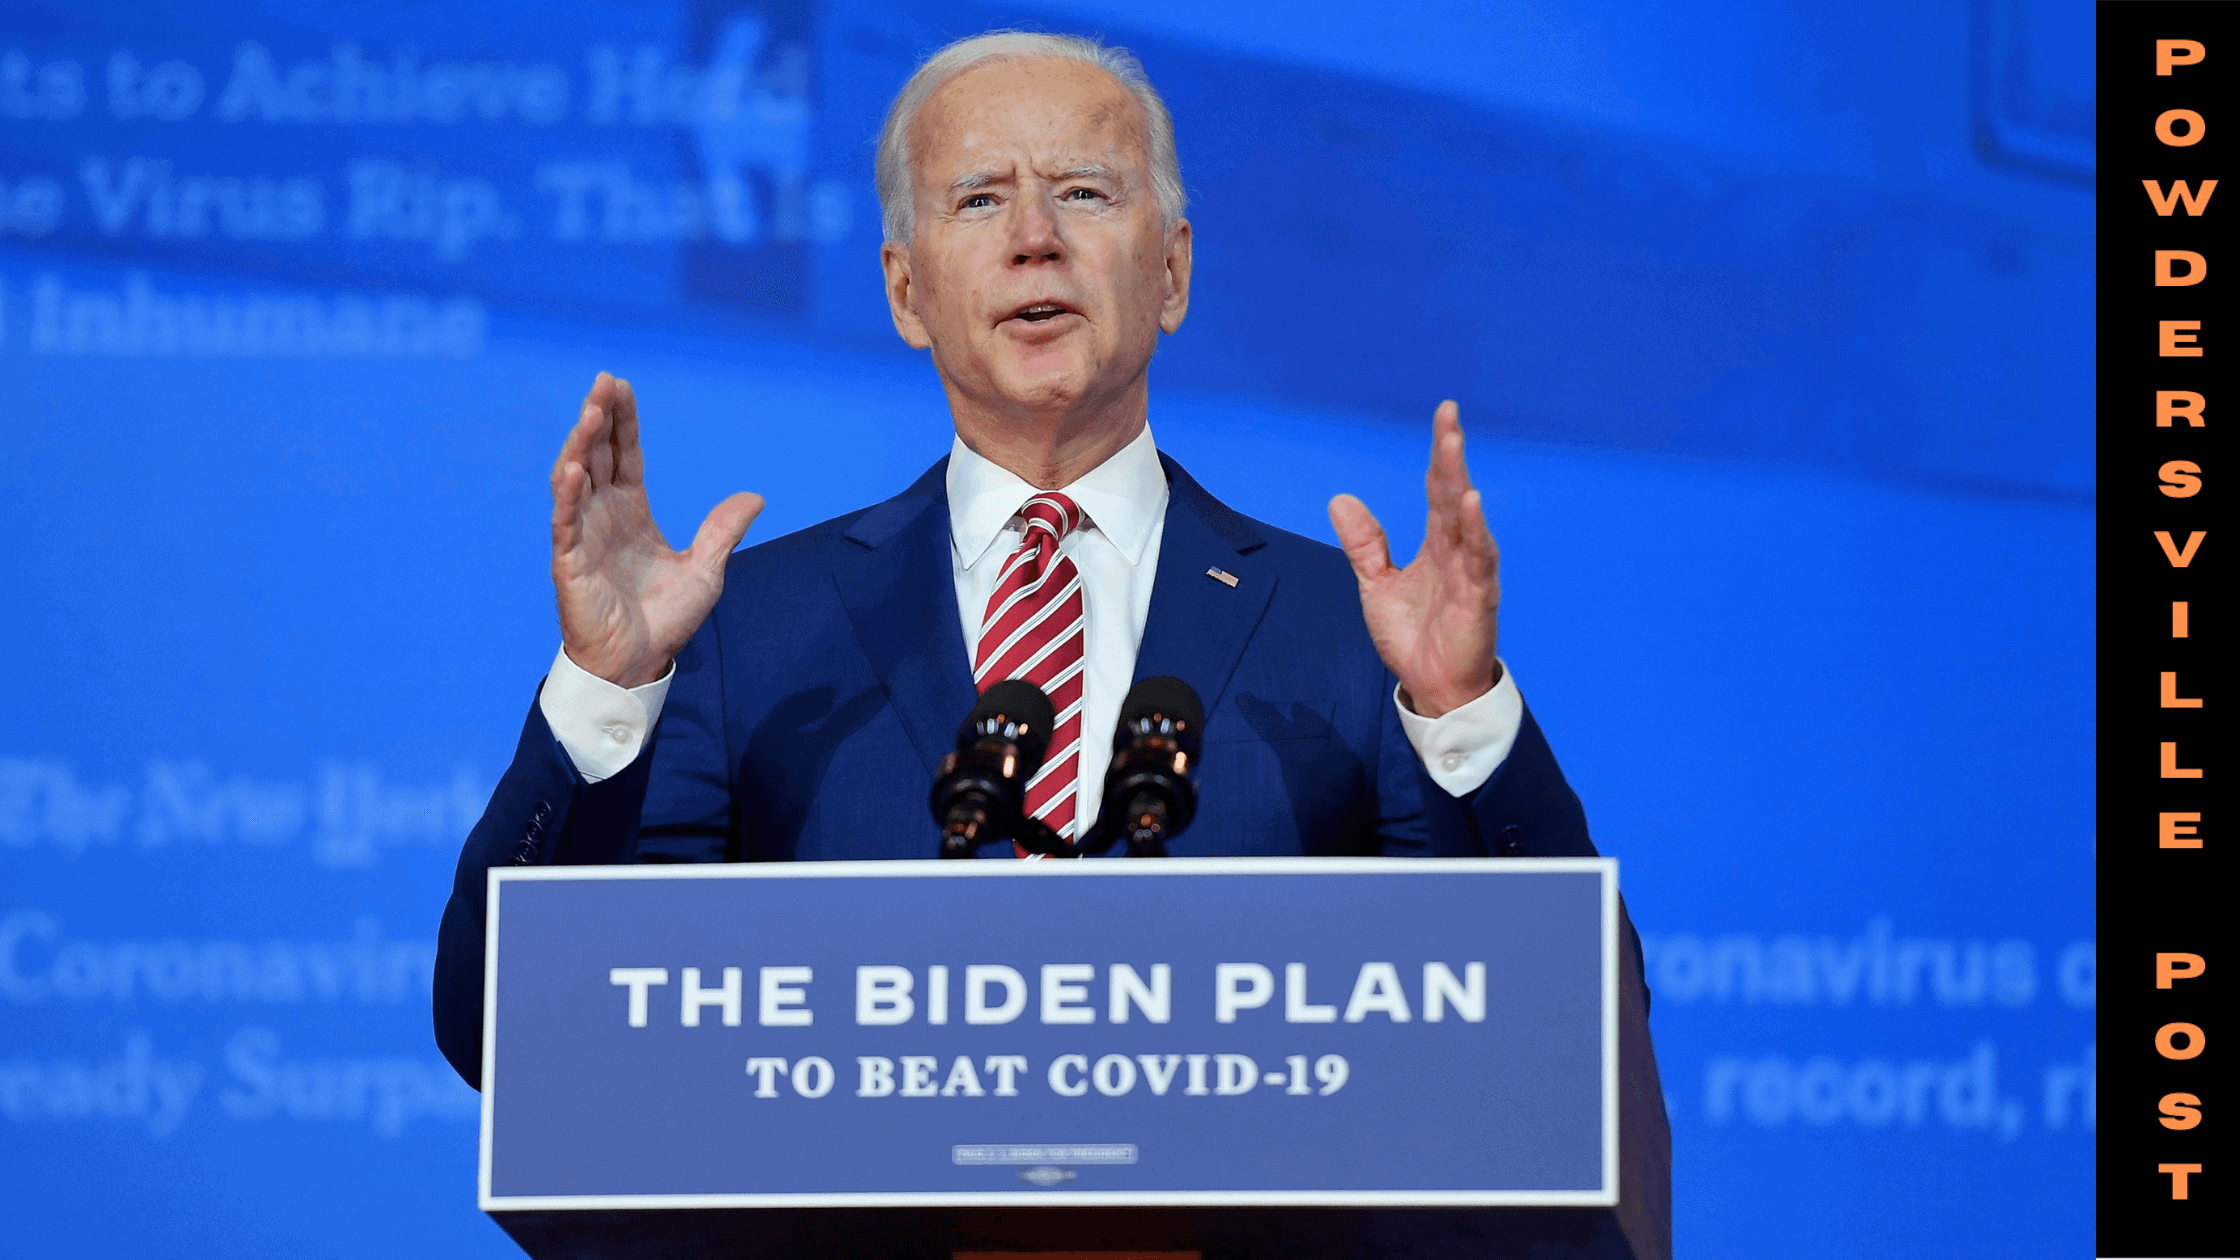 Biden's New Covid Plans To Safeguard The Citizens Of America